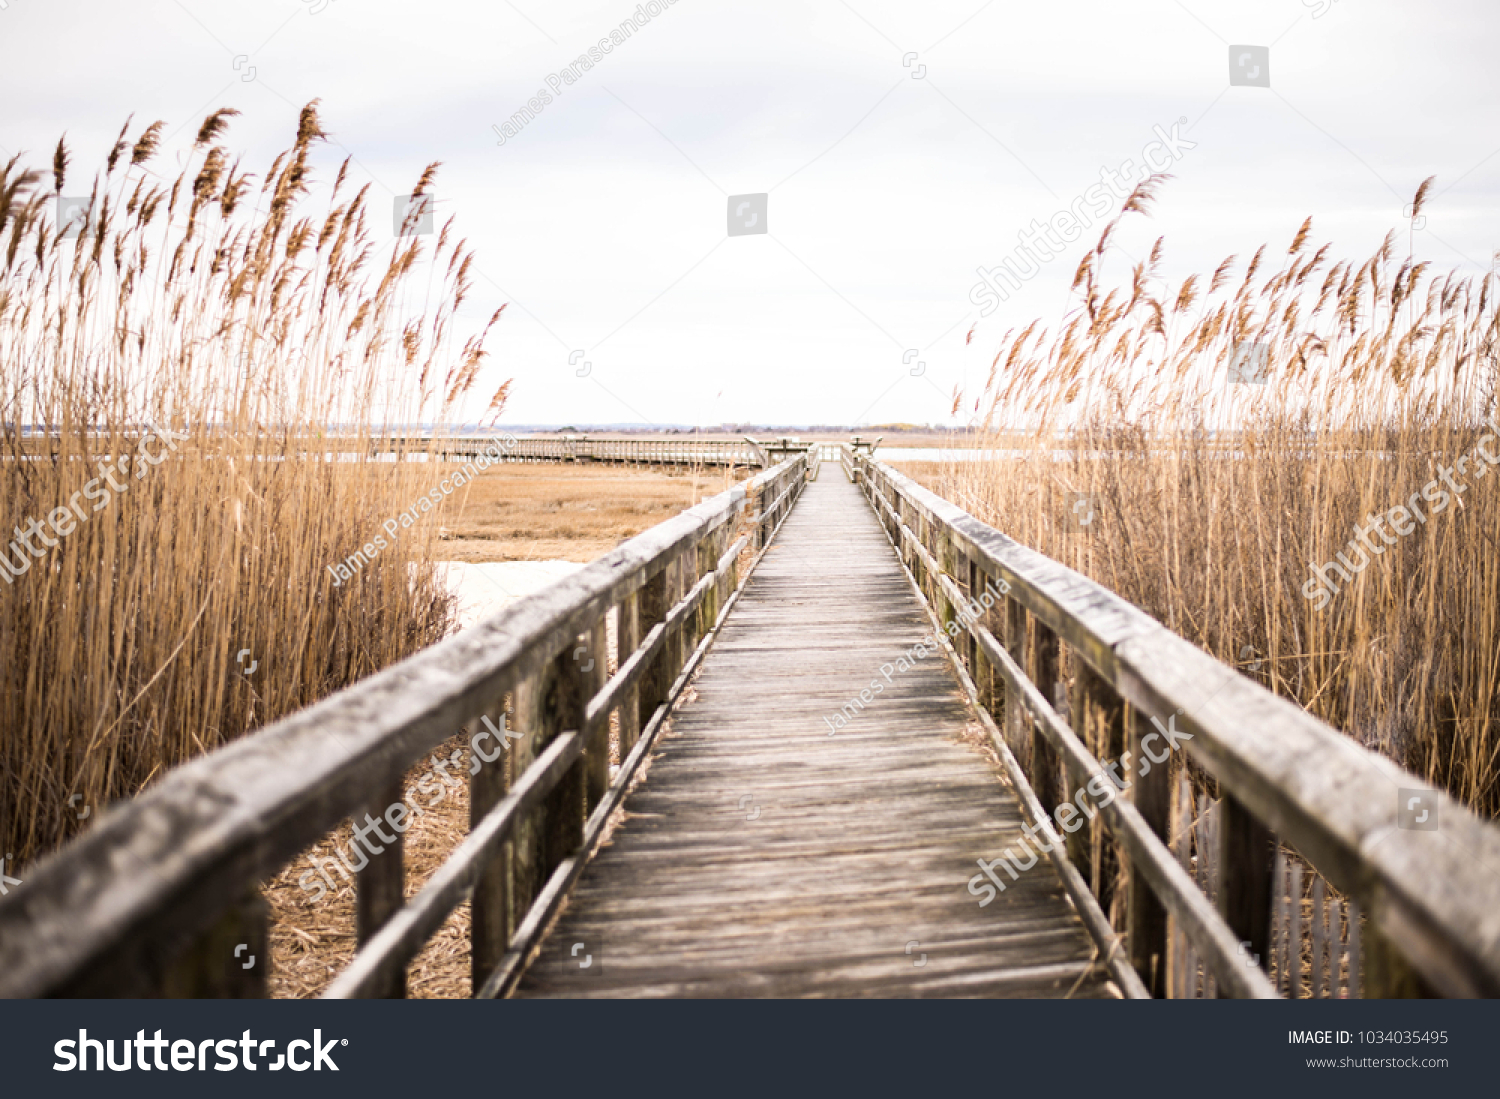 A wooden pier in Long Island, New York at Sunset. #1034035495